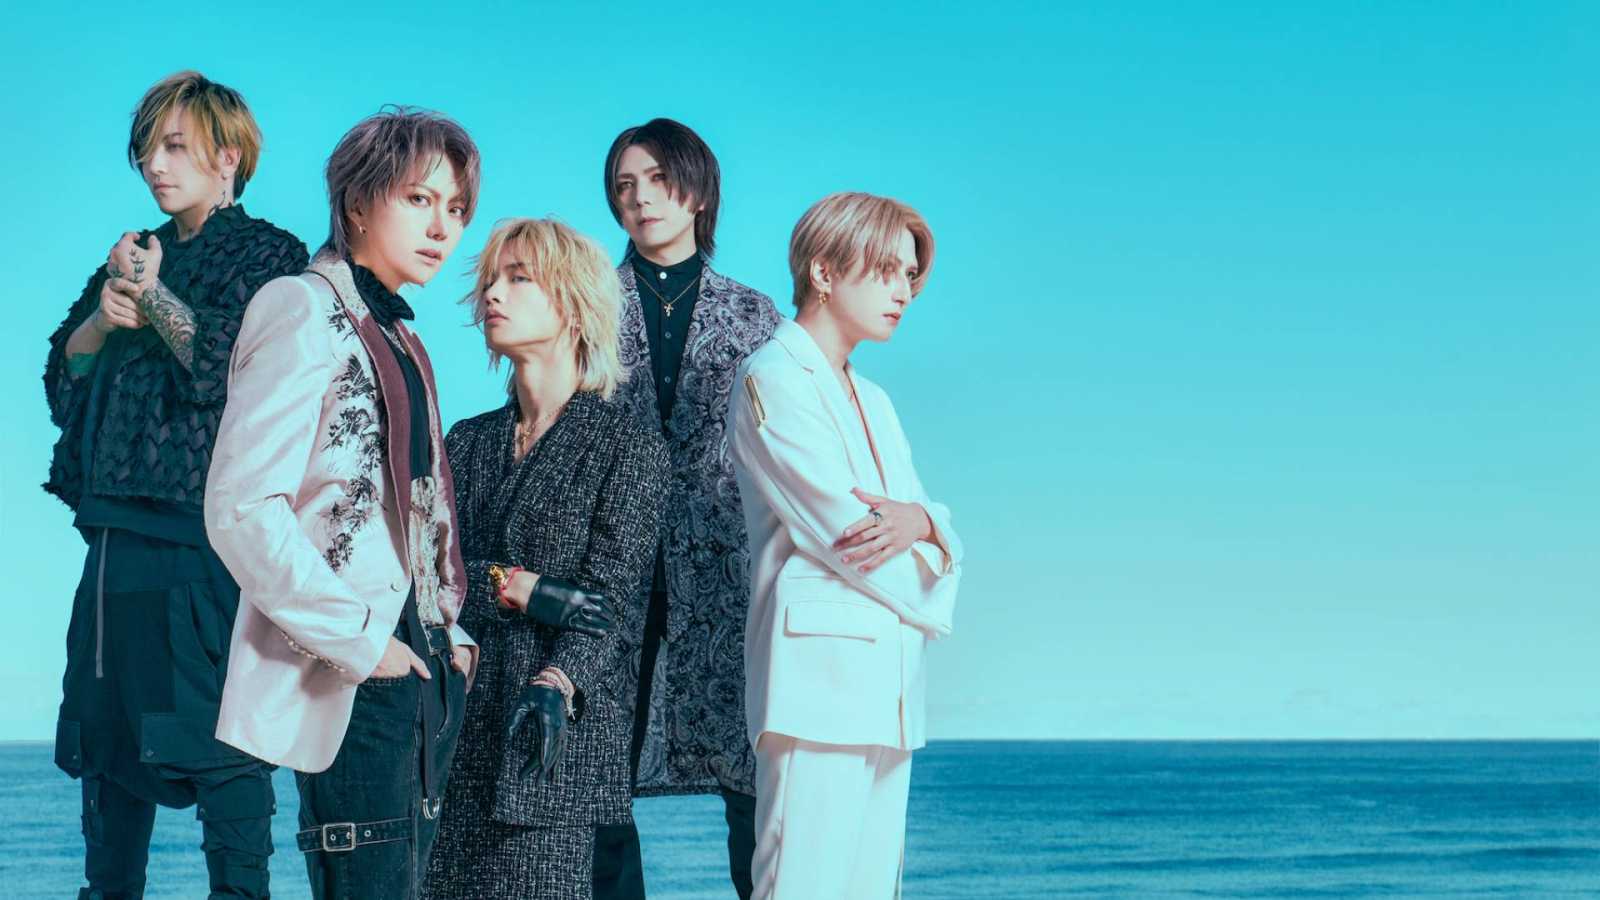 ALICE NINE. jää tauolle © NEXT DECADE All rights reserved.